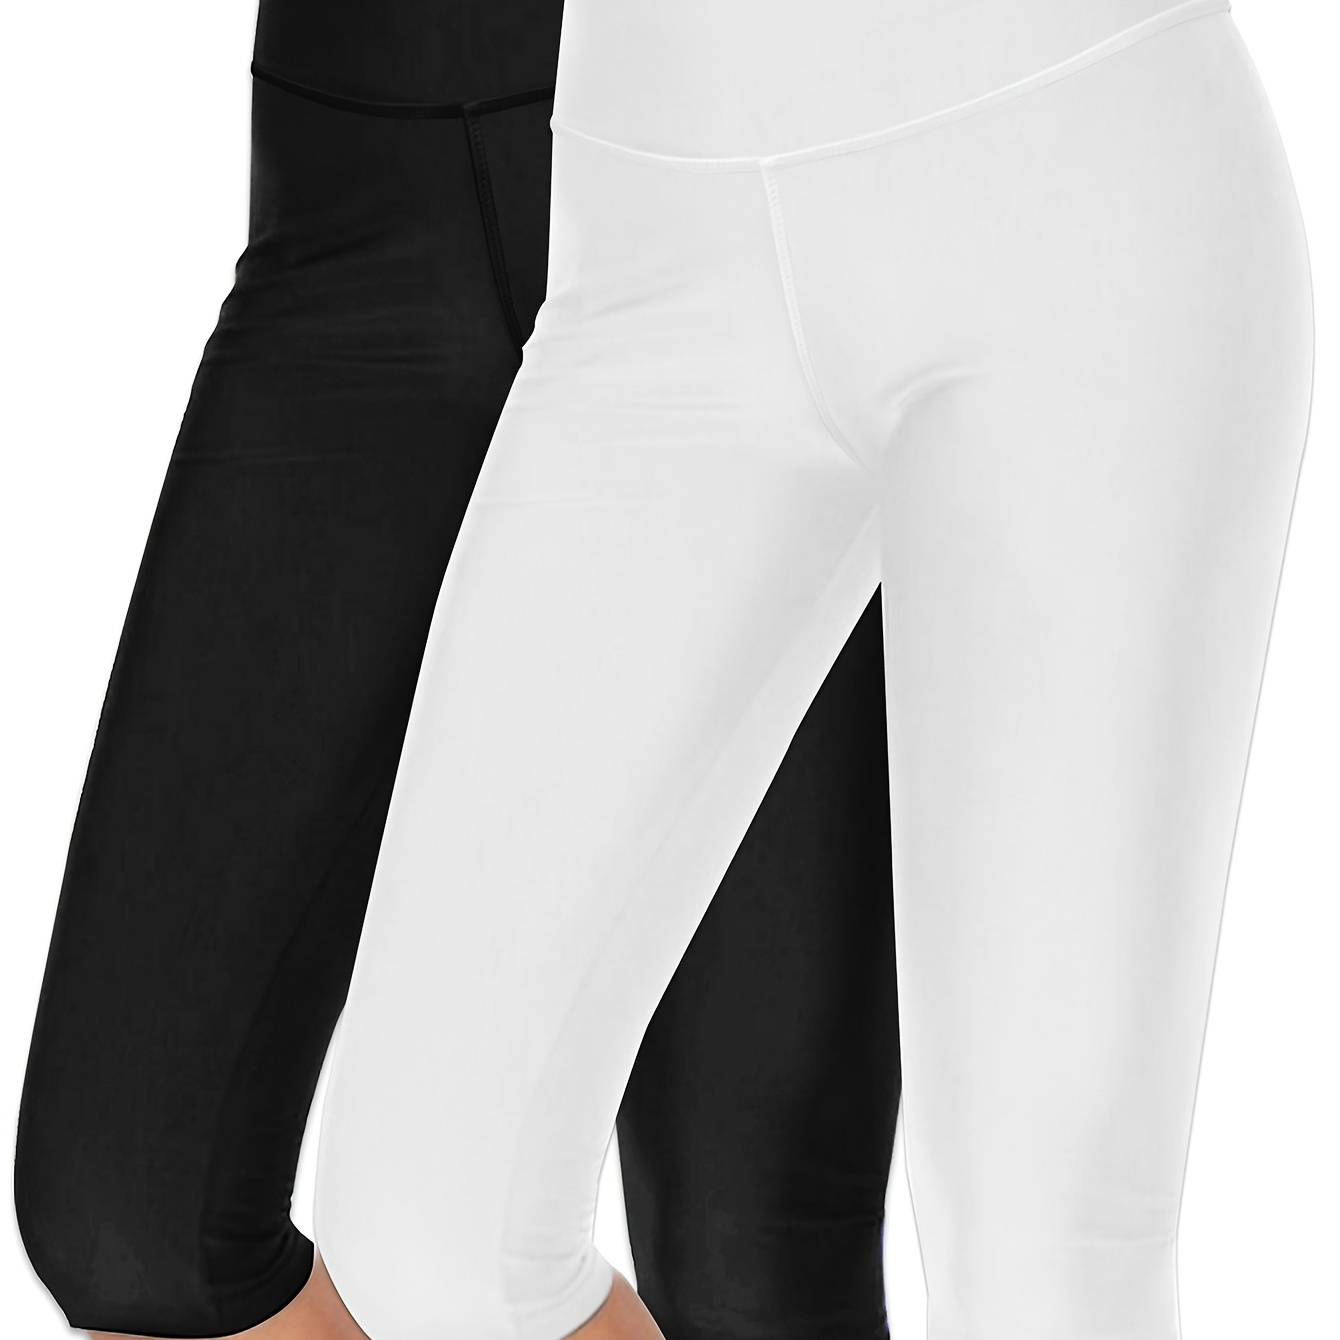 

2-pack Women's High-waisted Yoga Capri Leggings, Stretchable Breathable Fabric, Perfect For Fitness, Running, Yoga, Gym